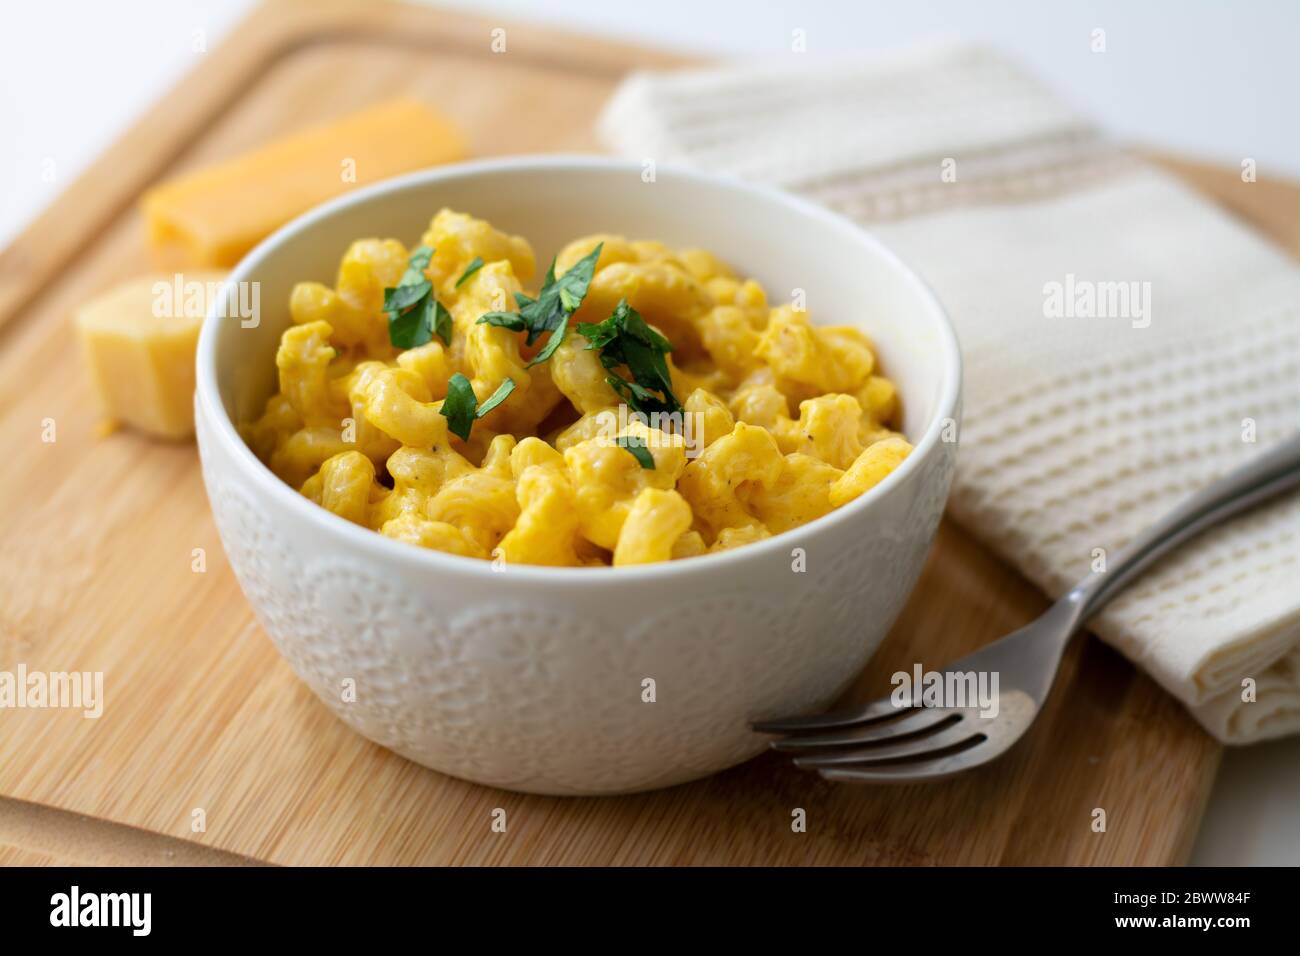 Traditional American macaroni and cheese comfort food (also called mac n cheese) with elbow pasta coated in a cheesy creamy cheddar sauce. Stock Photo